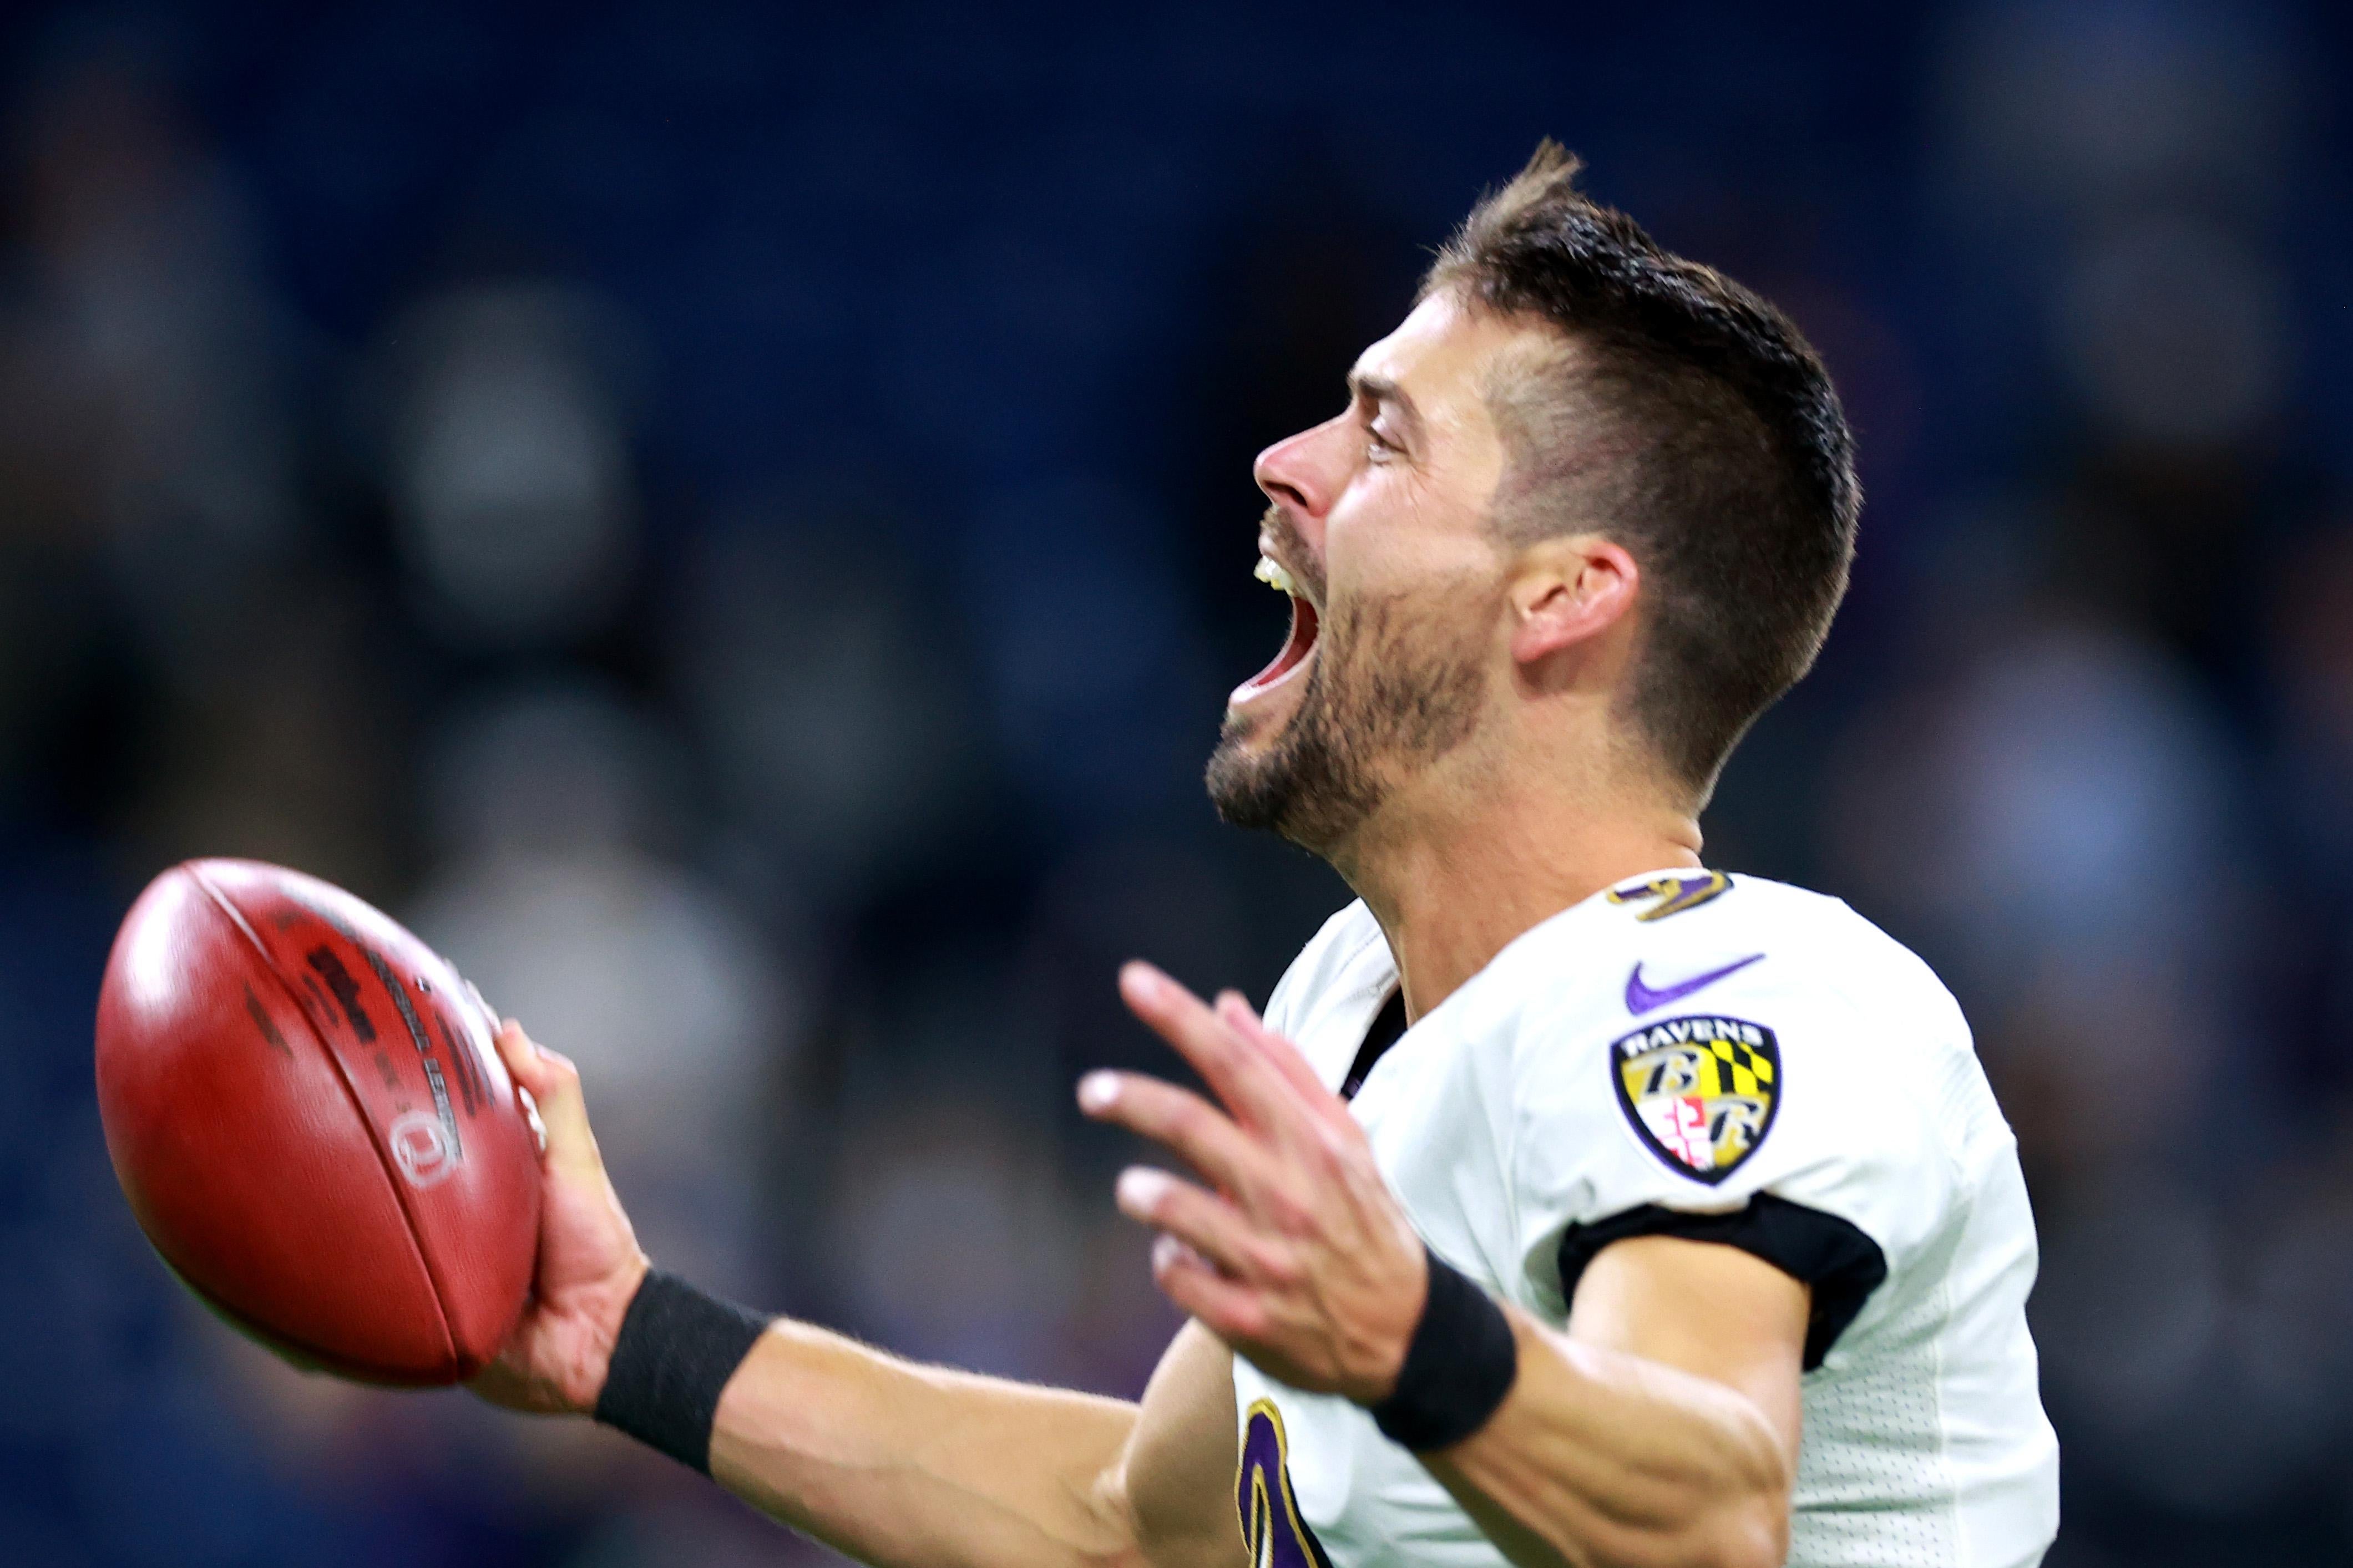 Justin Tucker exults while holding a football.